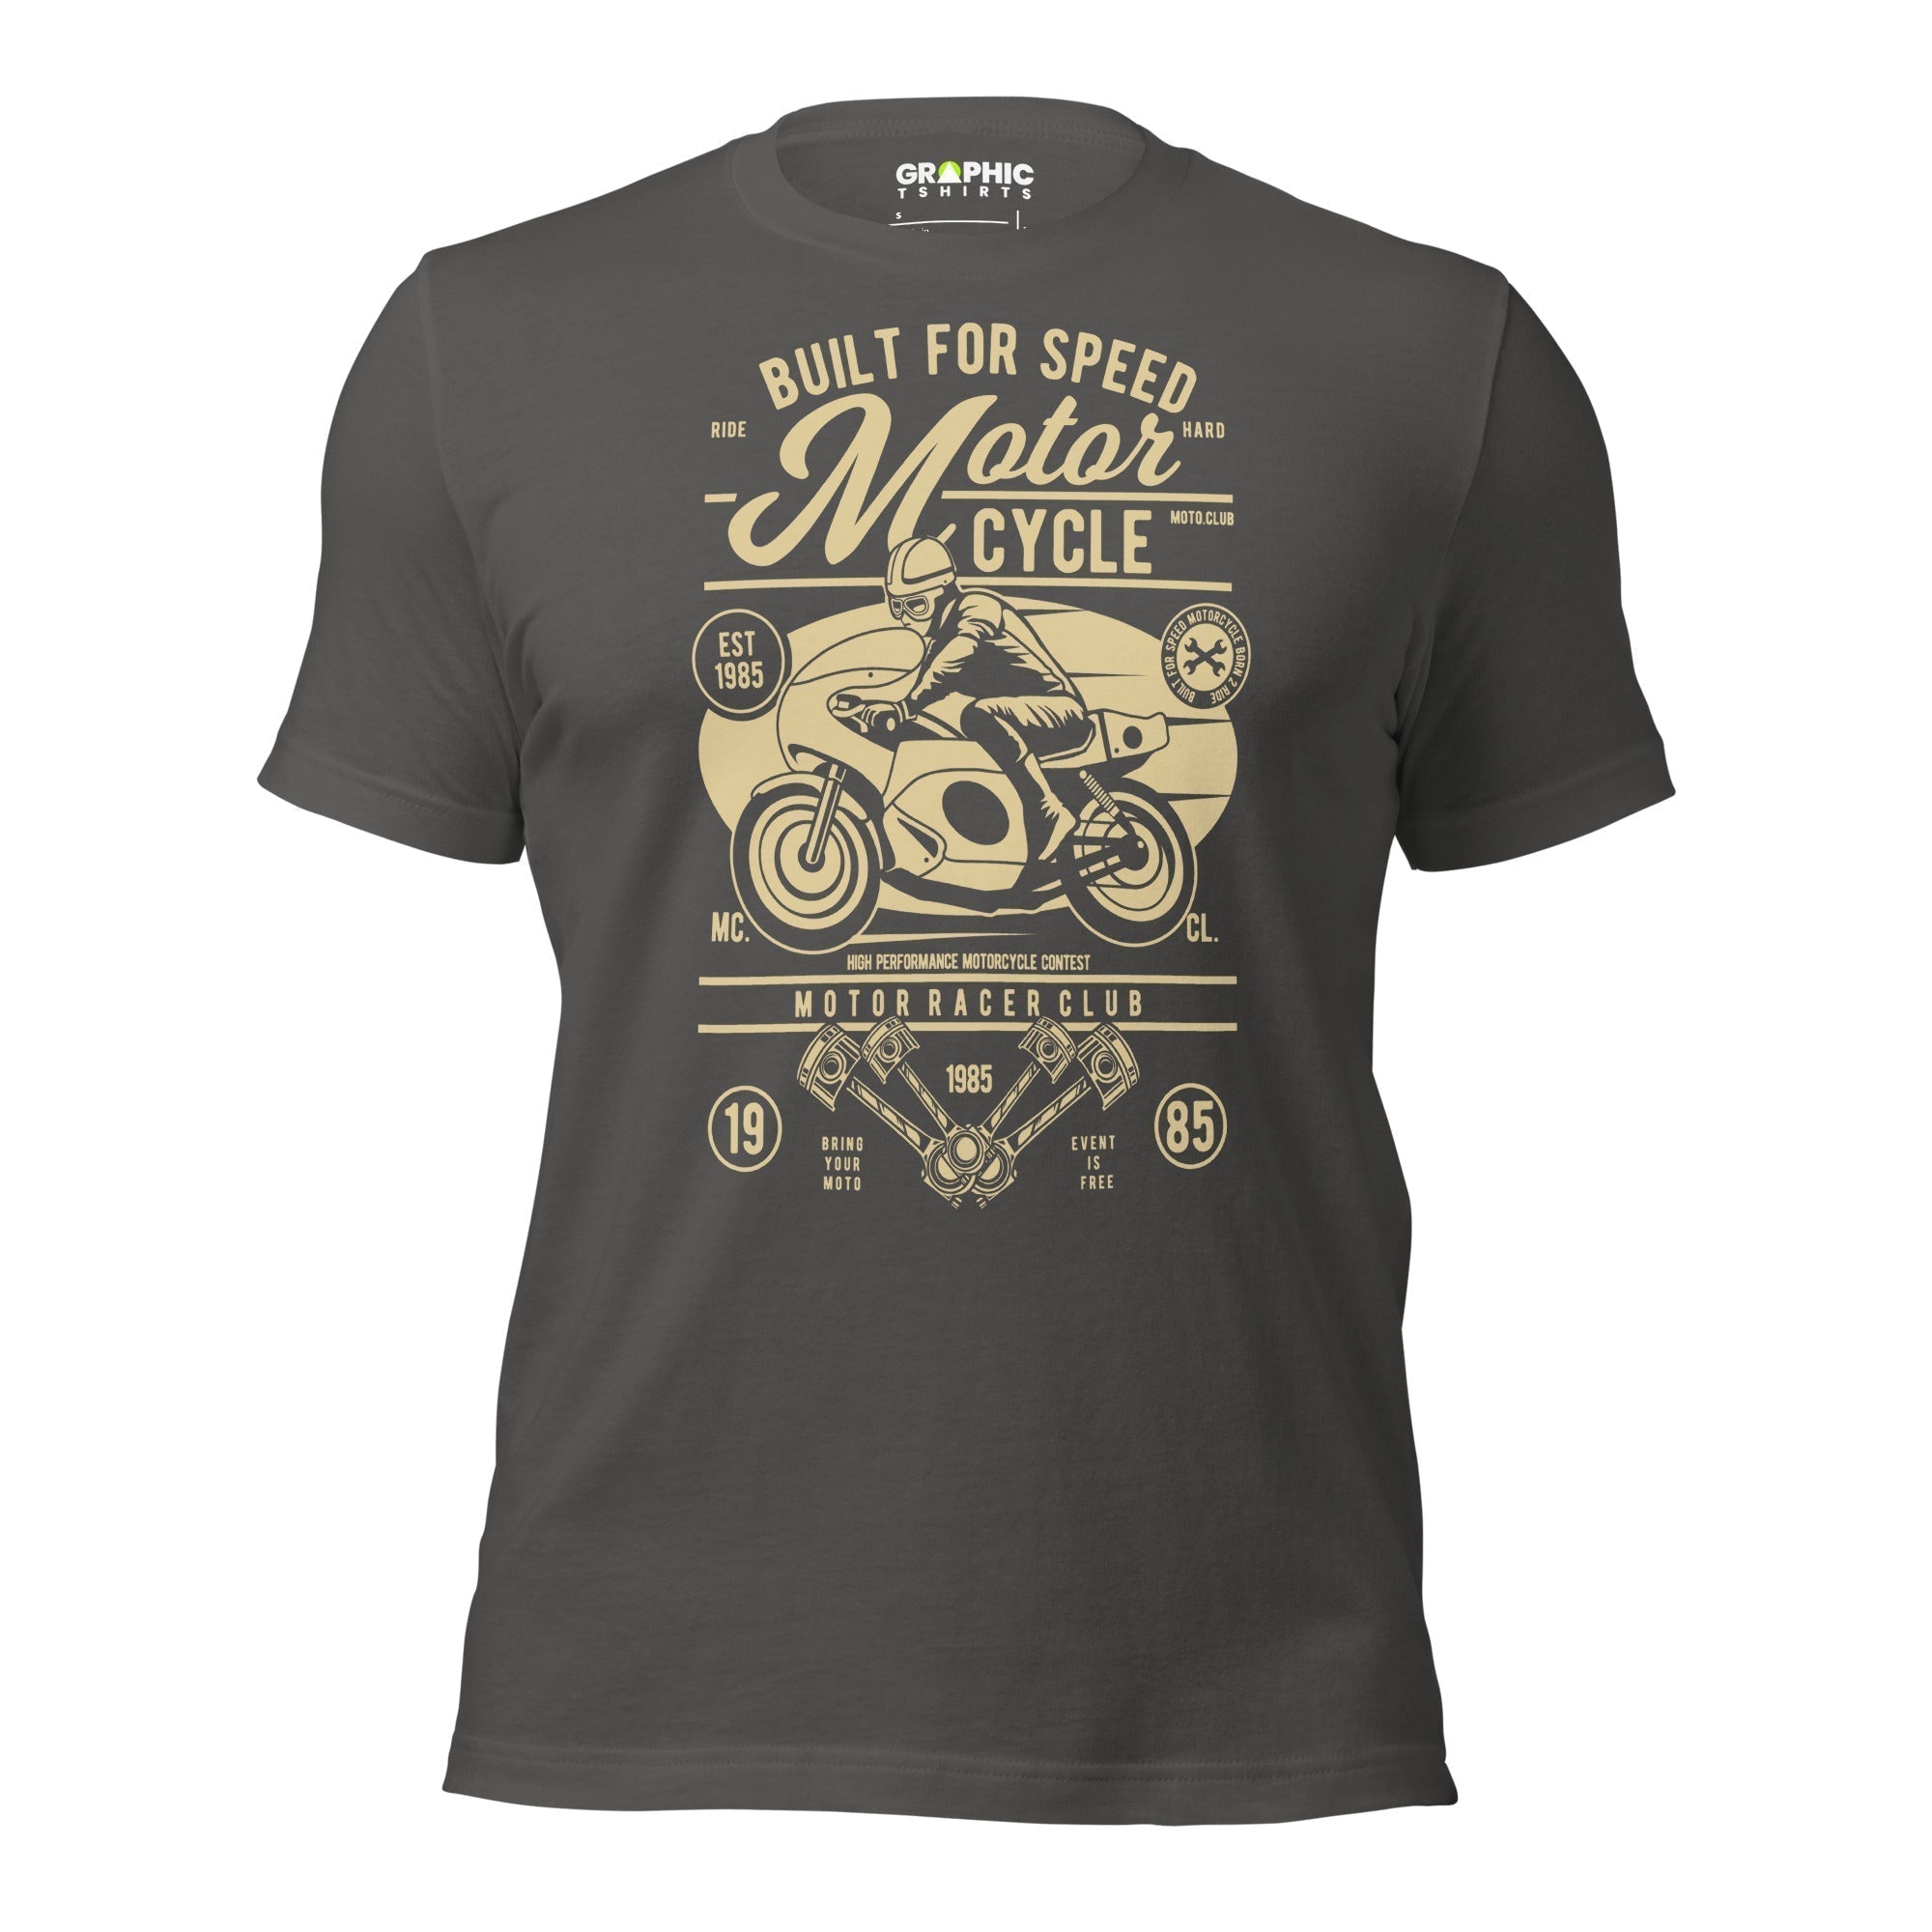 Unisex Staple T-Shirt - Motorcycle Built For Speed Ride Hard Motor Racer Club Est 1985 - GRAPHIC T-SHIRTS